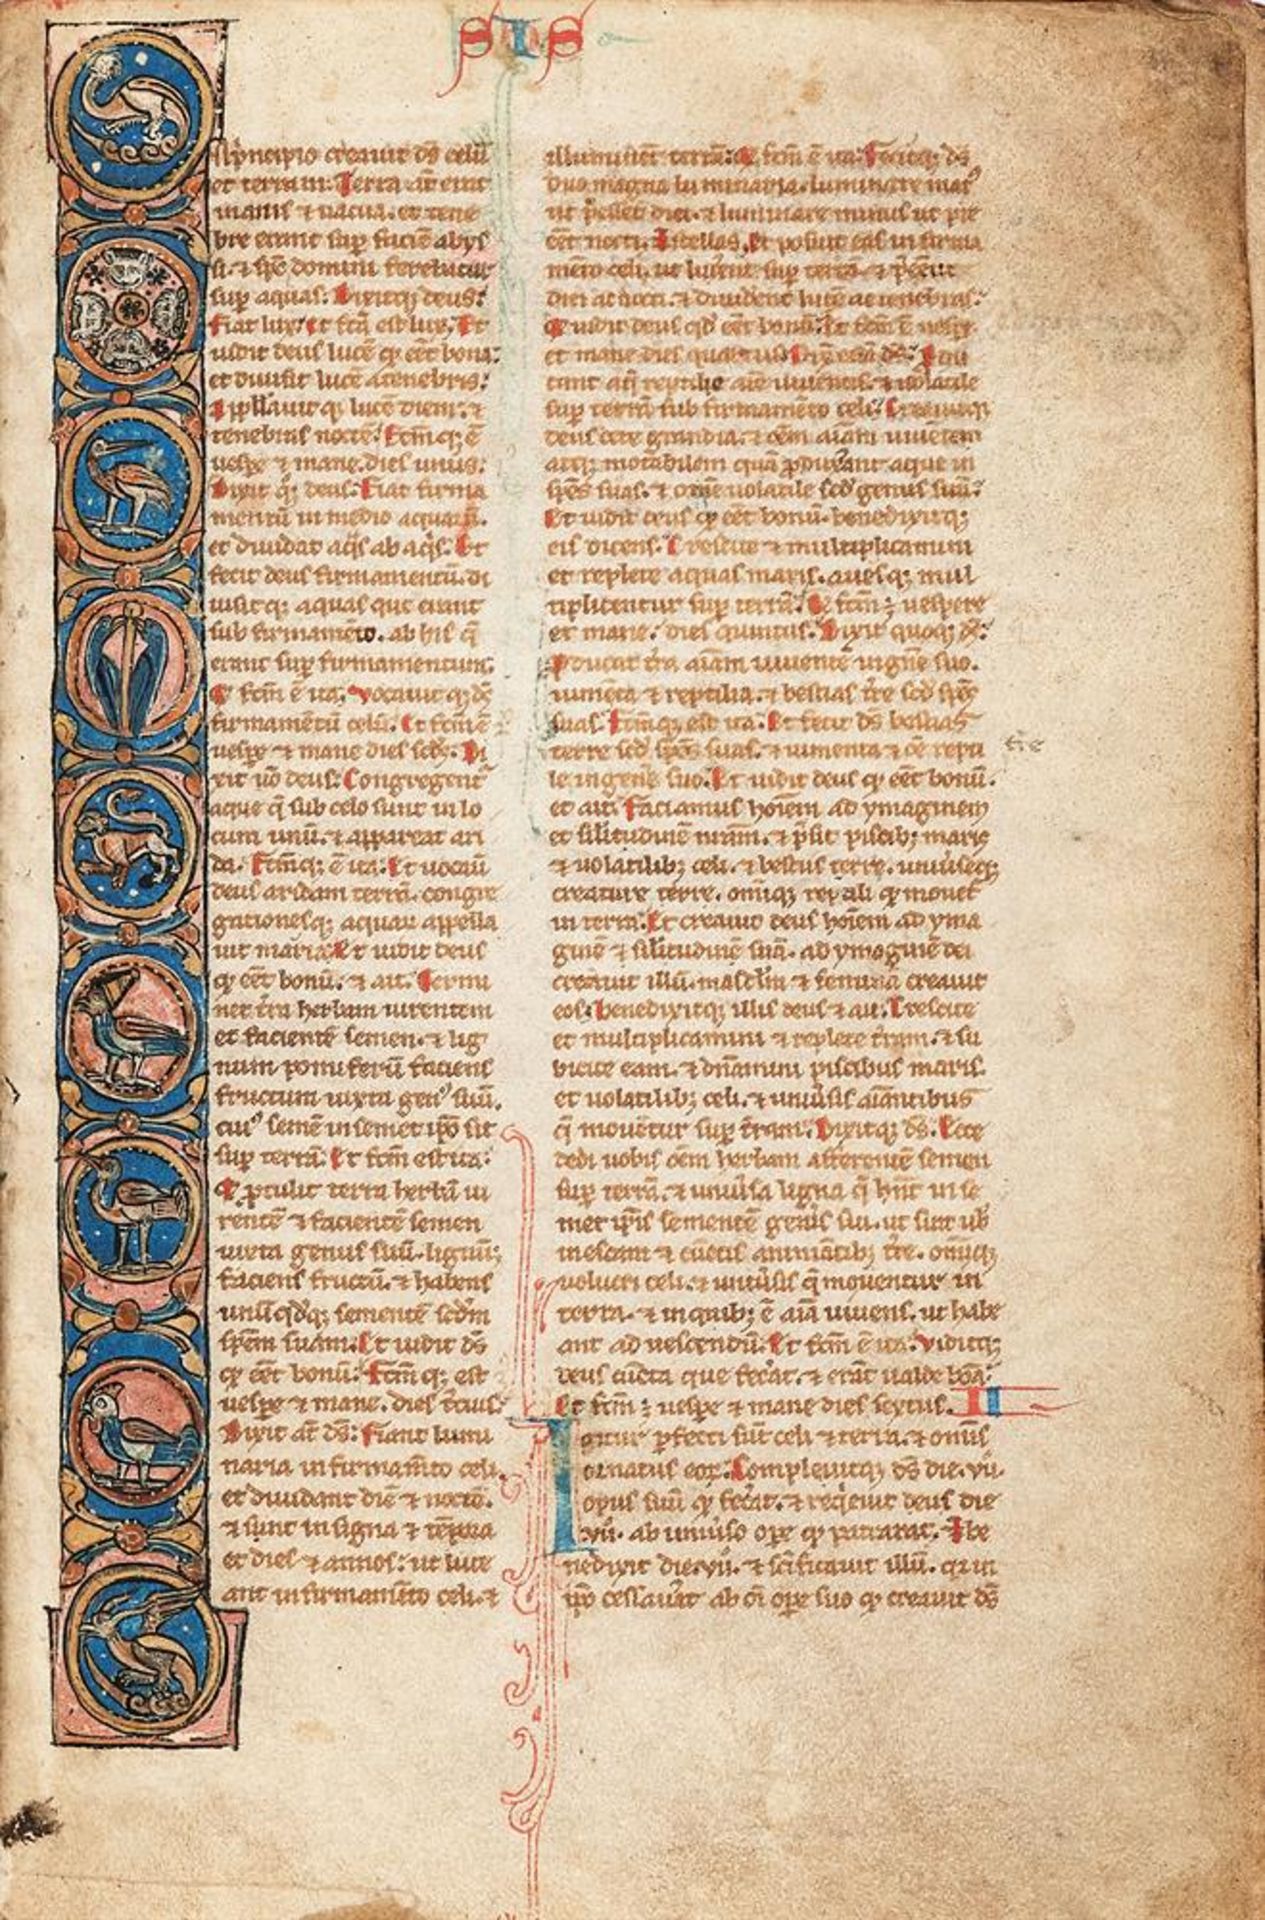 Ɵ The Bishop Carr Bible, in Latin, decorated manuscript on parchment